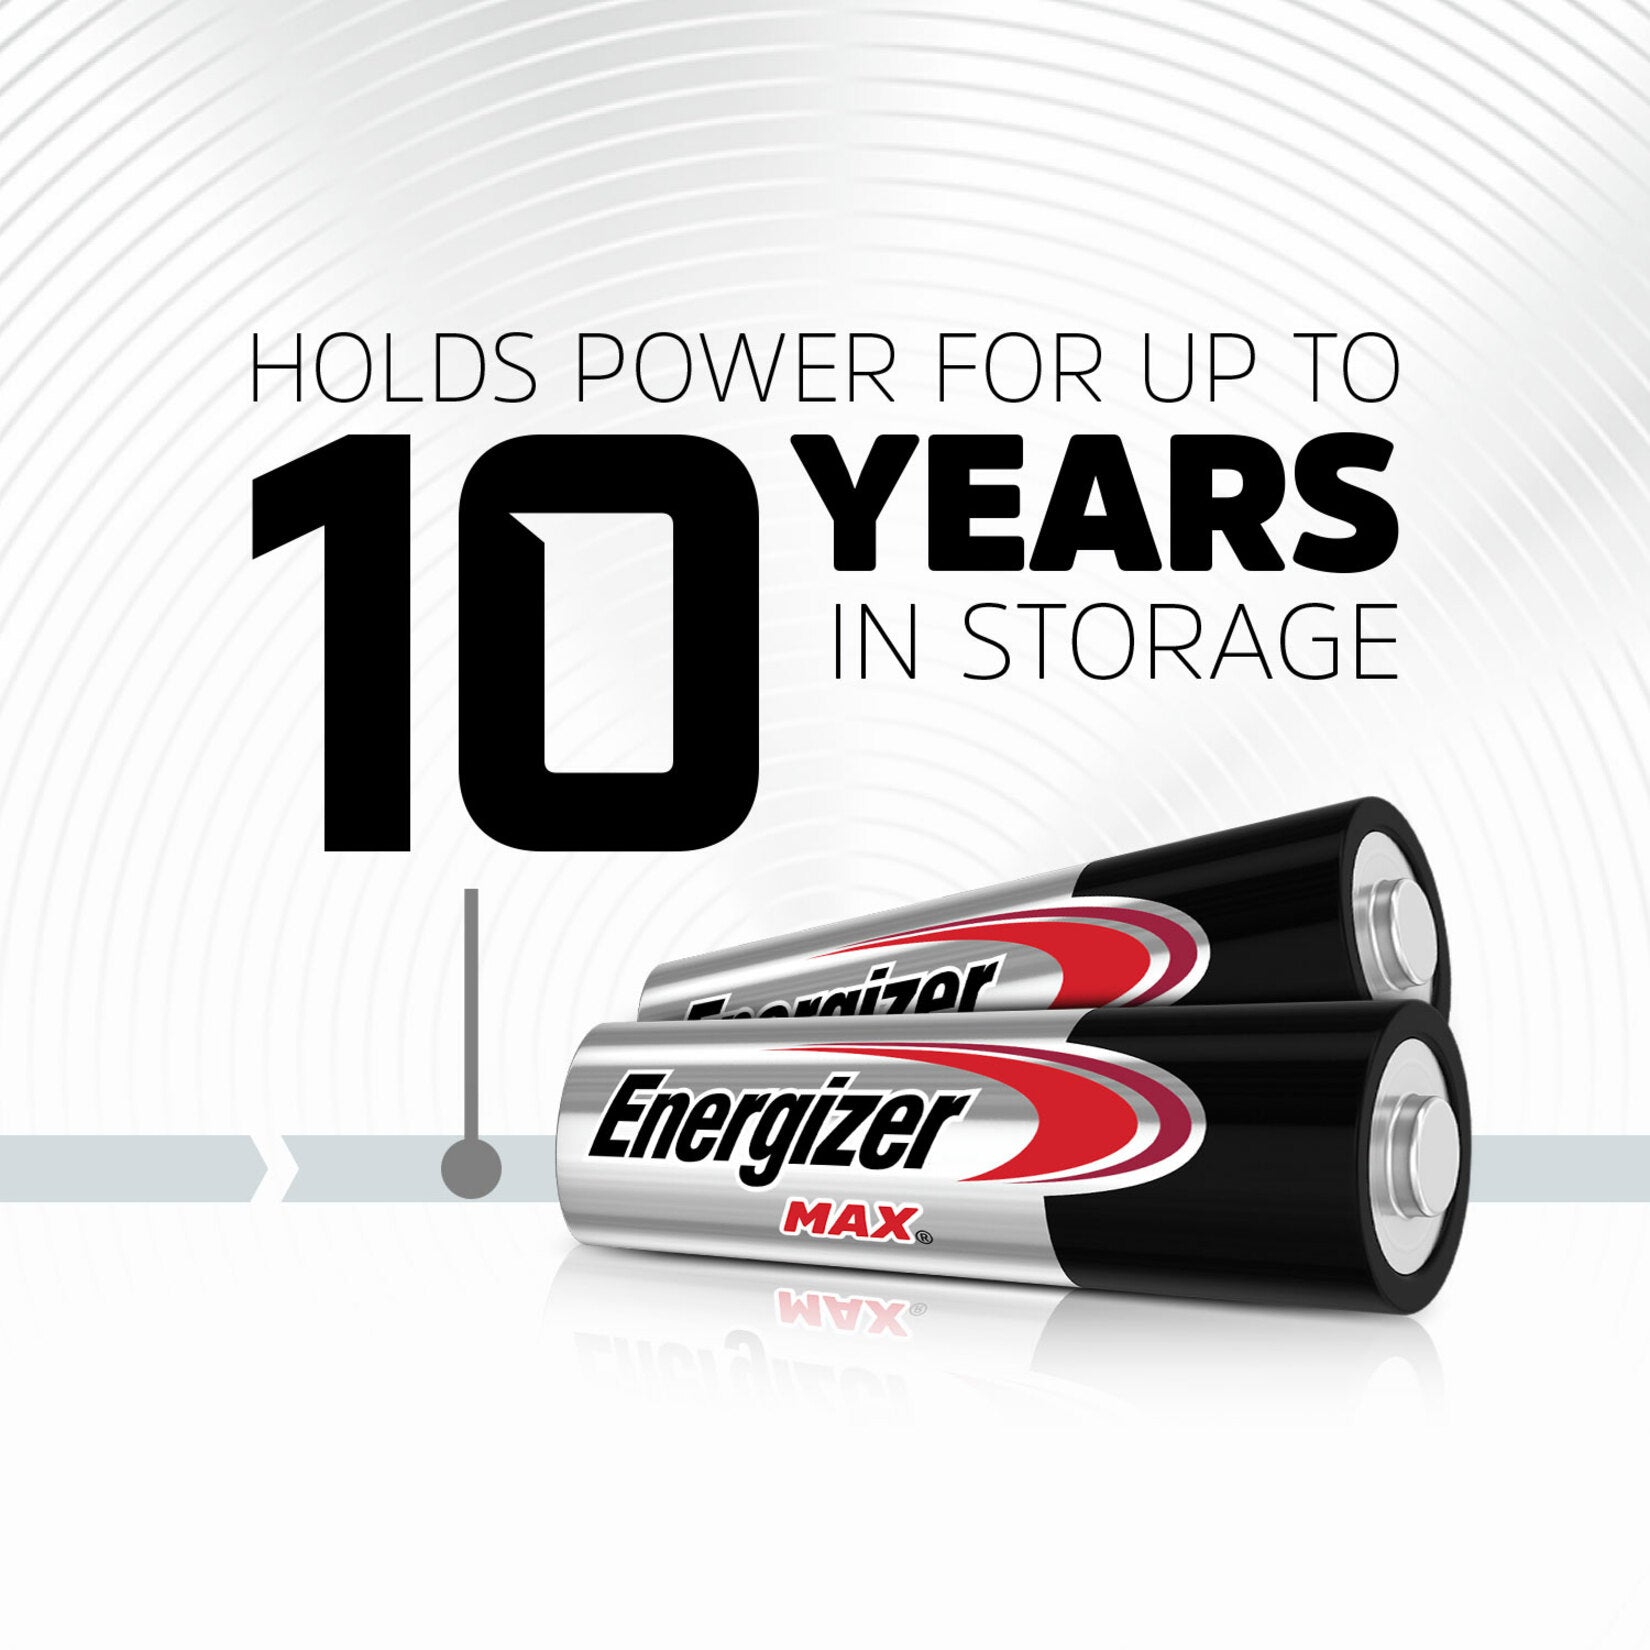 Energizer E91BW-12EM MAX Alkaline AA Batteries, Long-lasting Power for Toys, Digital Cameras, and More